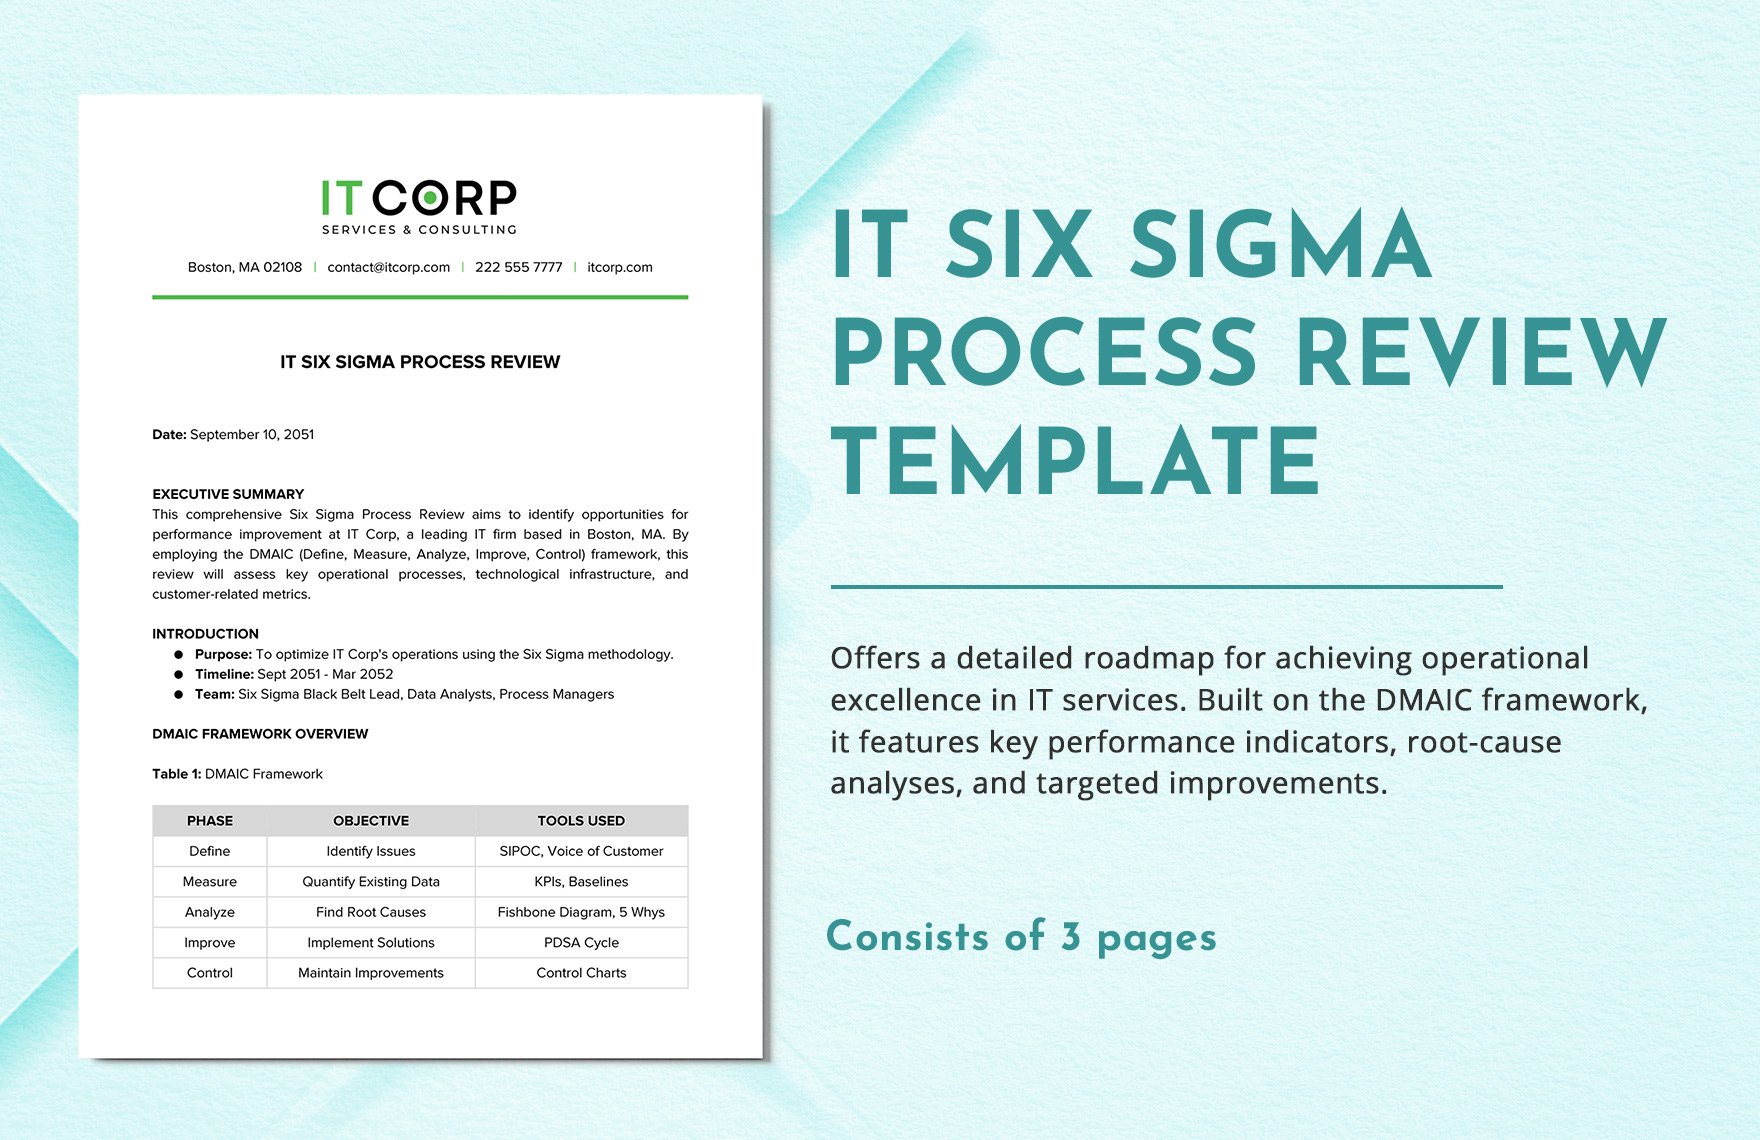 IT Six Sigma Process Review Template